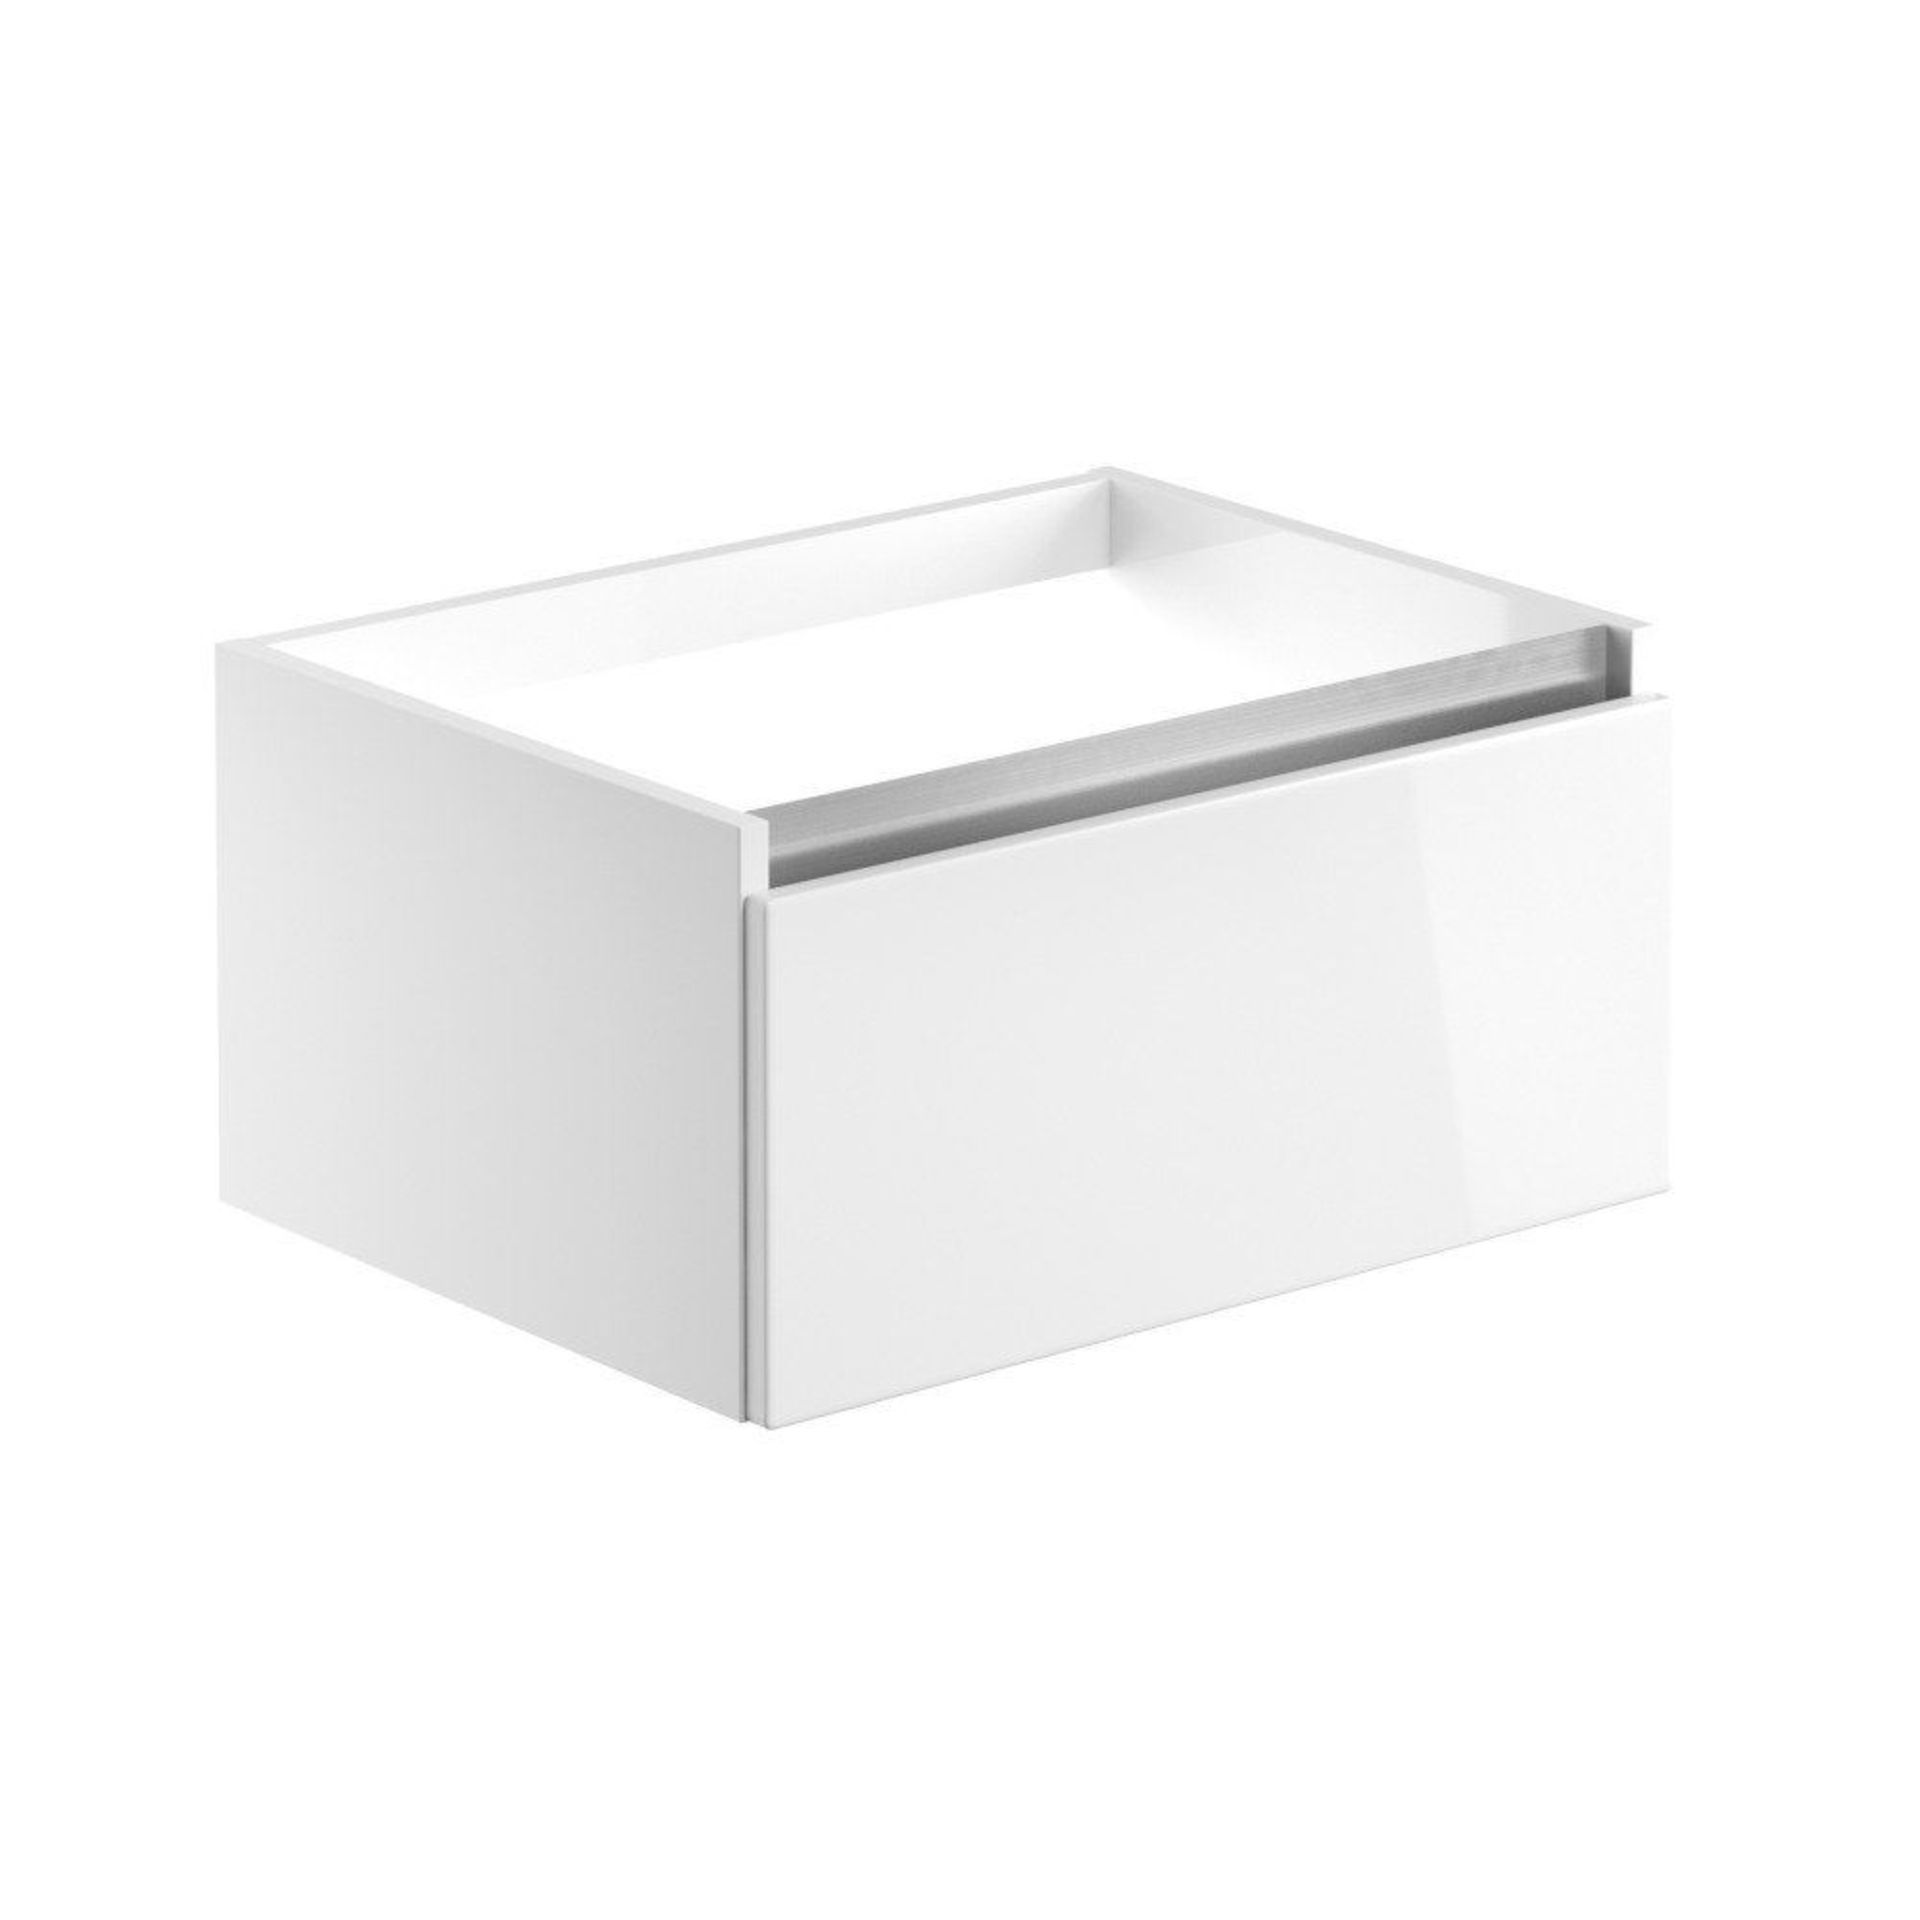 (SUP171) New Carino 600 mm 1 Drawer Wall Hung Vanity Unit. White Gloss. Fully Handle less Design.